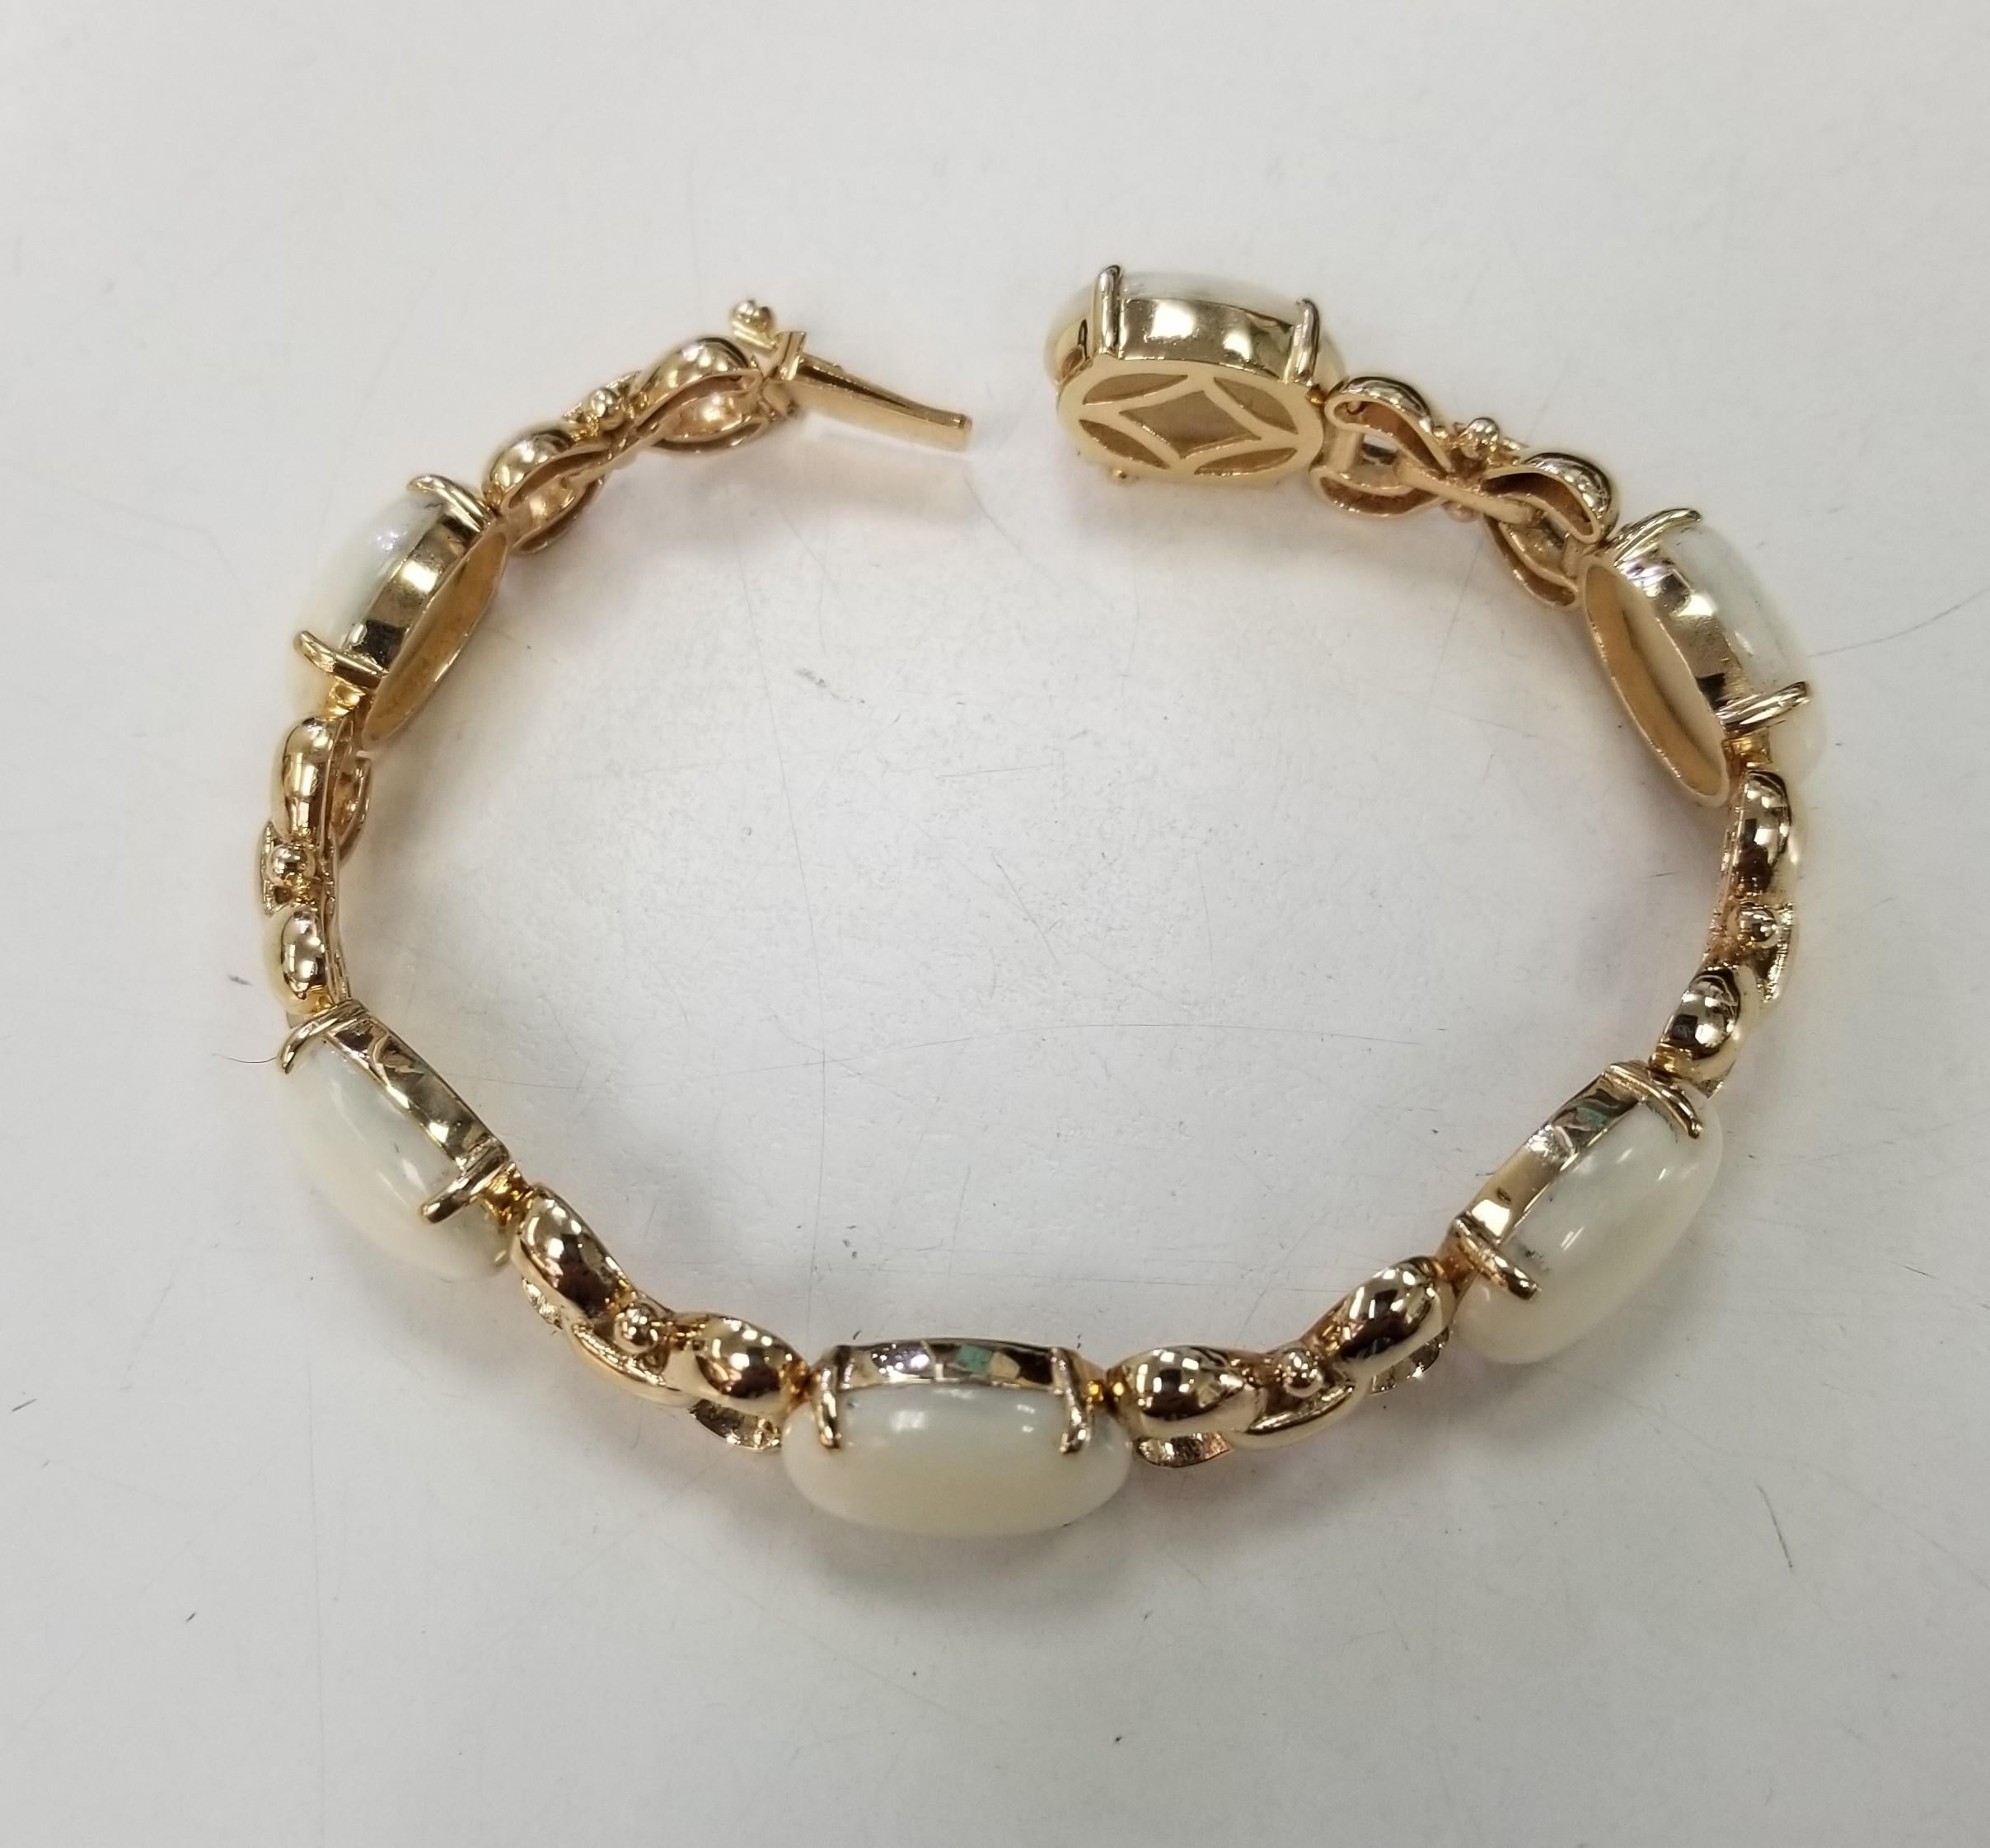  Elegant and finely detailed Link Bracelet, securely Hand set with 6 oval cabochon White Coral stones. Hand crafted in 14 Karat Yellow Gold. The Bracelet epitomizes vintage charm, taking you from day to evening effortlessly. The Bracelet is in